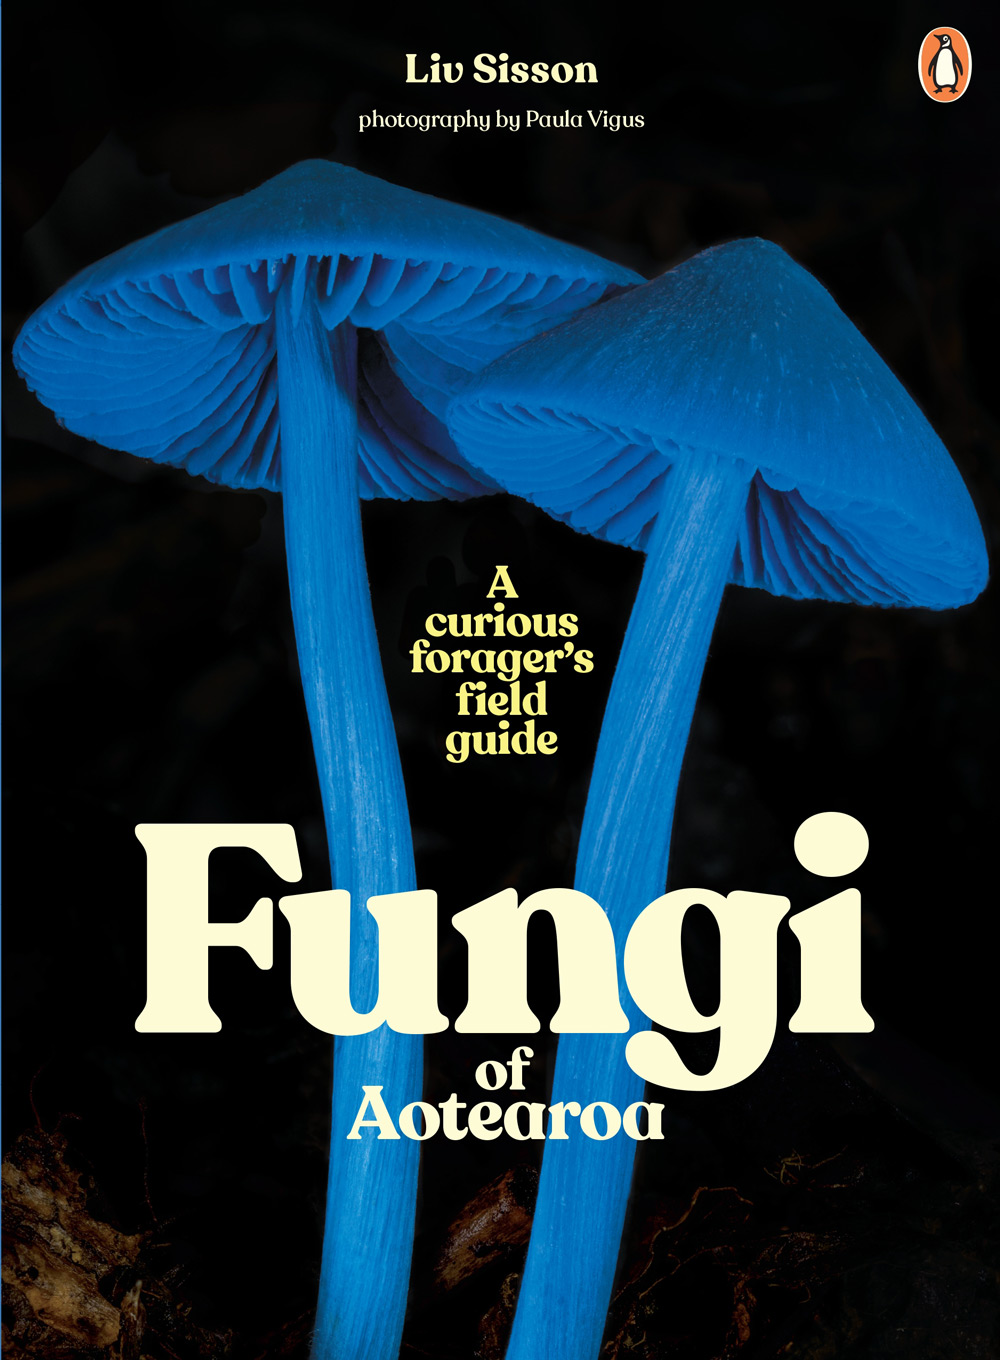 Fungi of Aotearoa New Zealand: A Curious Forager’s Field Guide